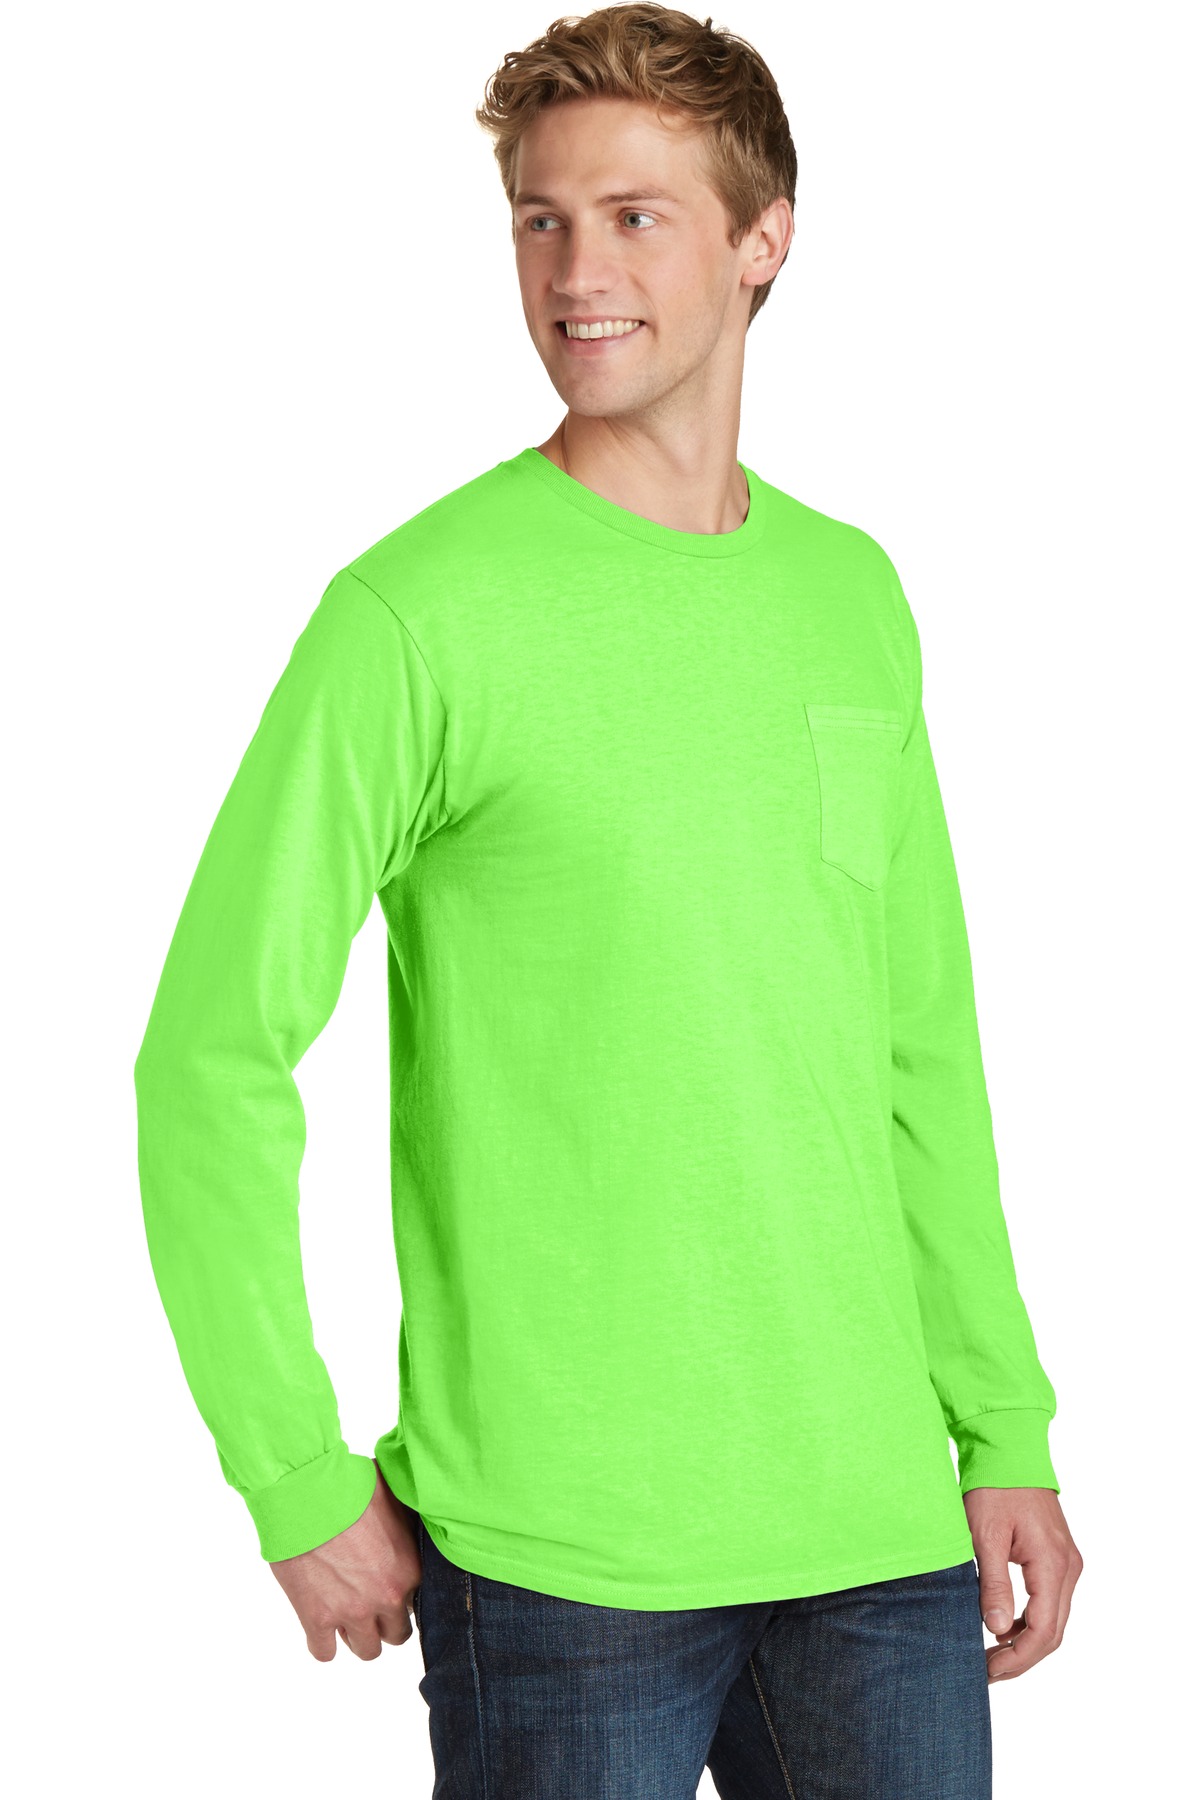 Port & Company Pigment Dyed Long Sleeve Pocket Tee-M (Neon Green) - image 4 of 6